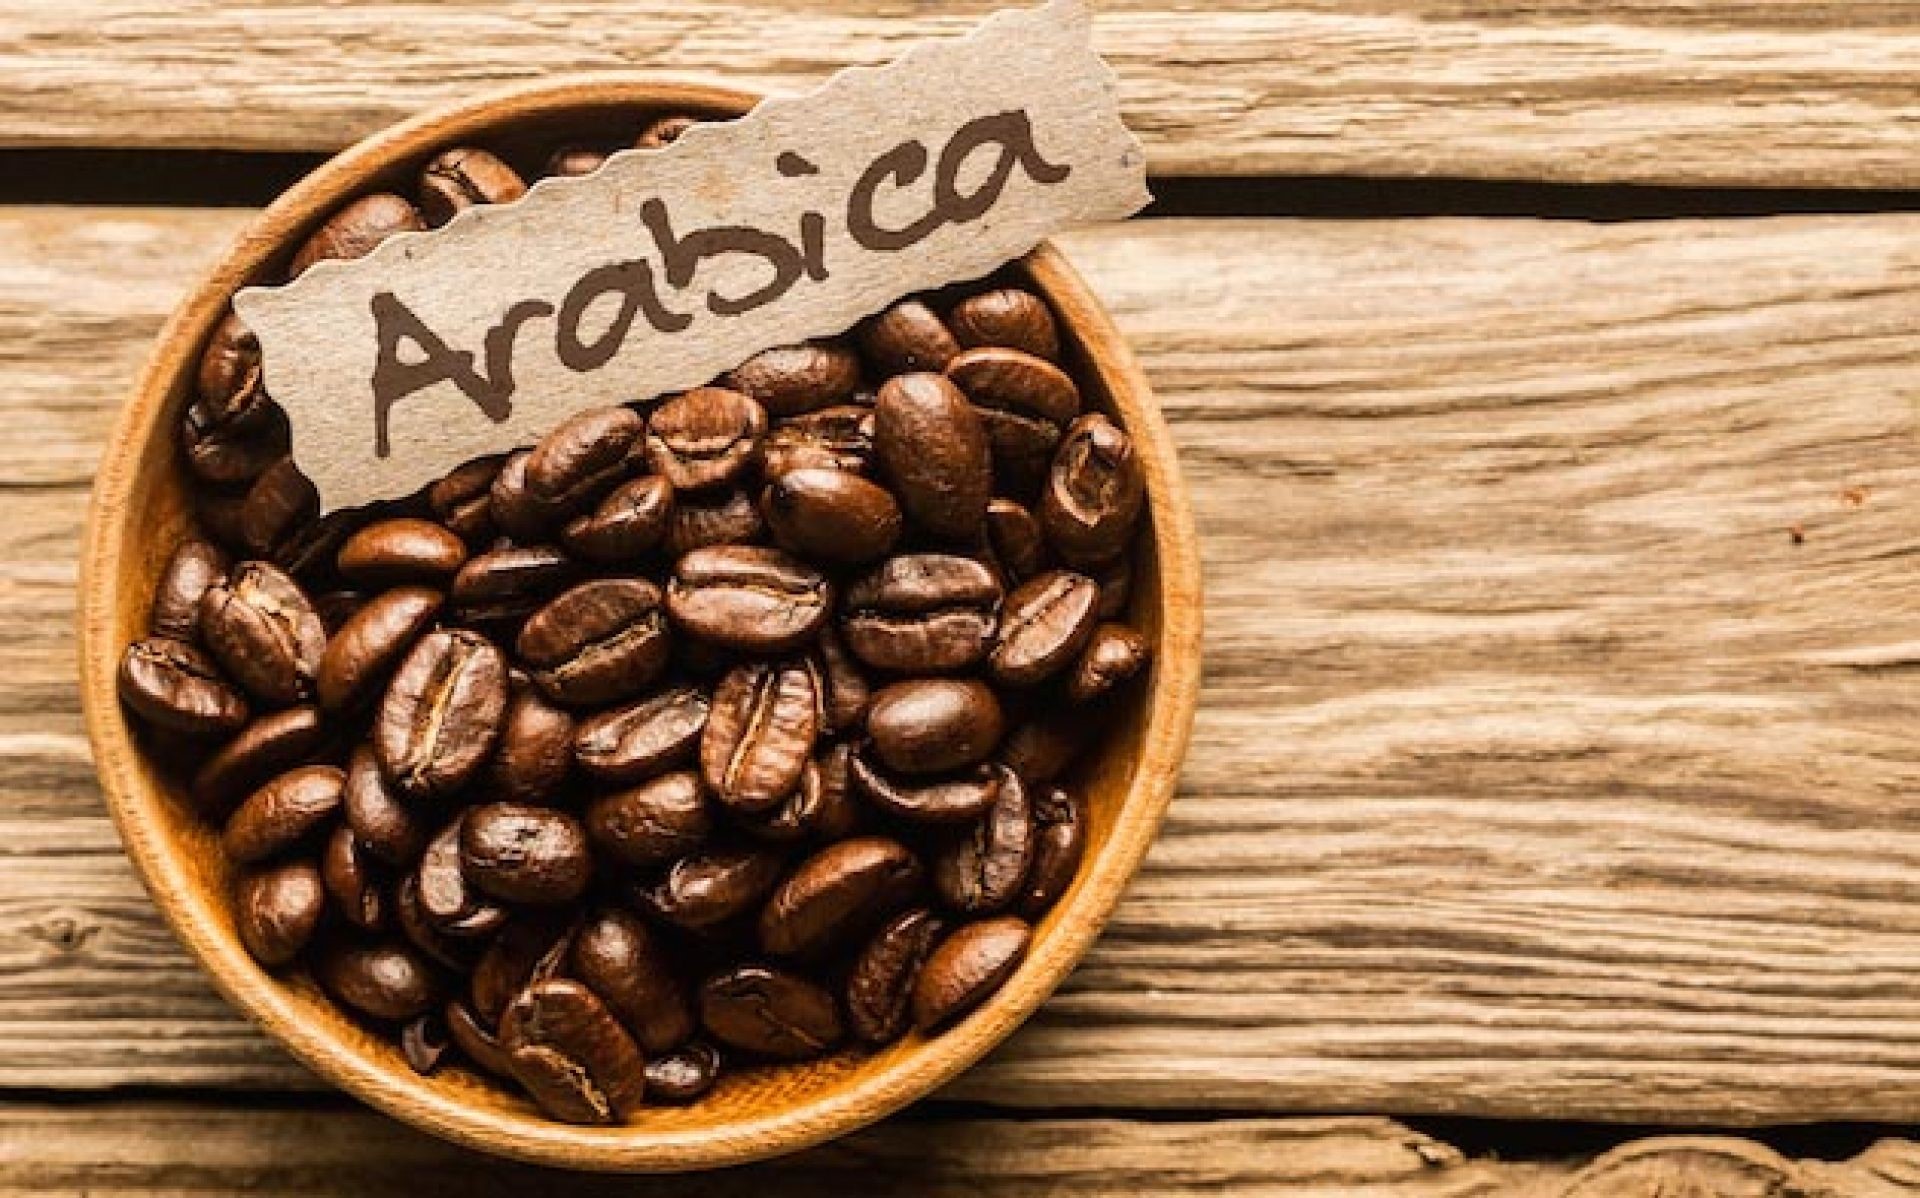 Learn about Arabica coffee